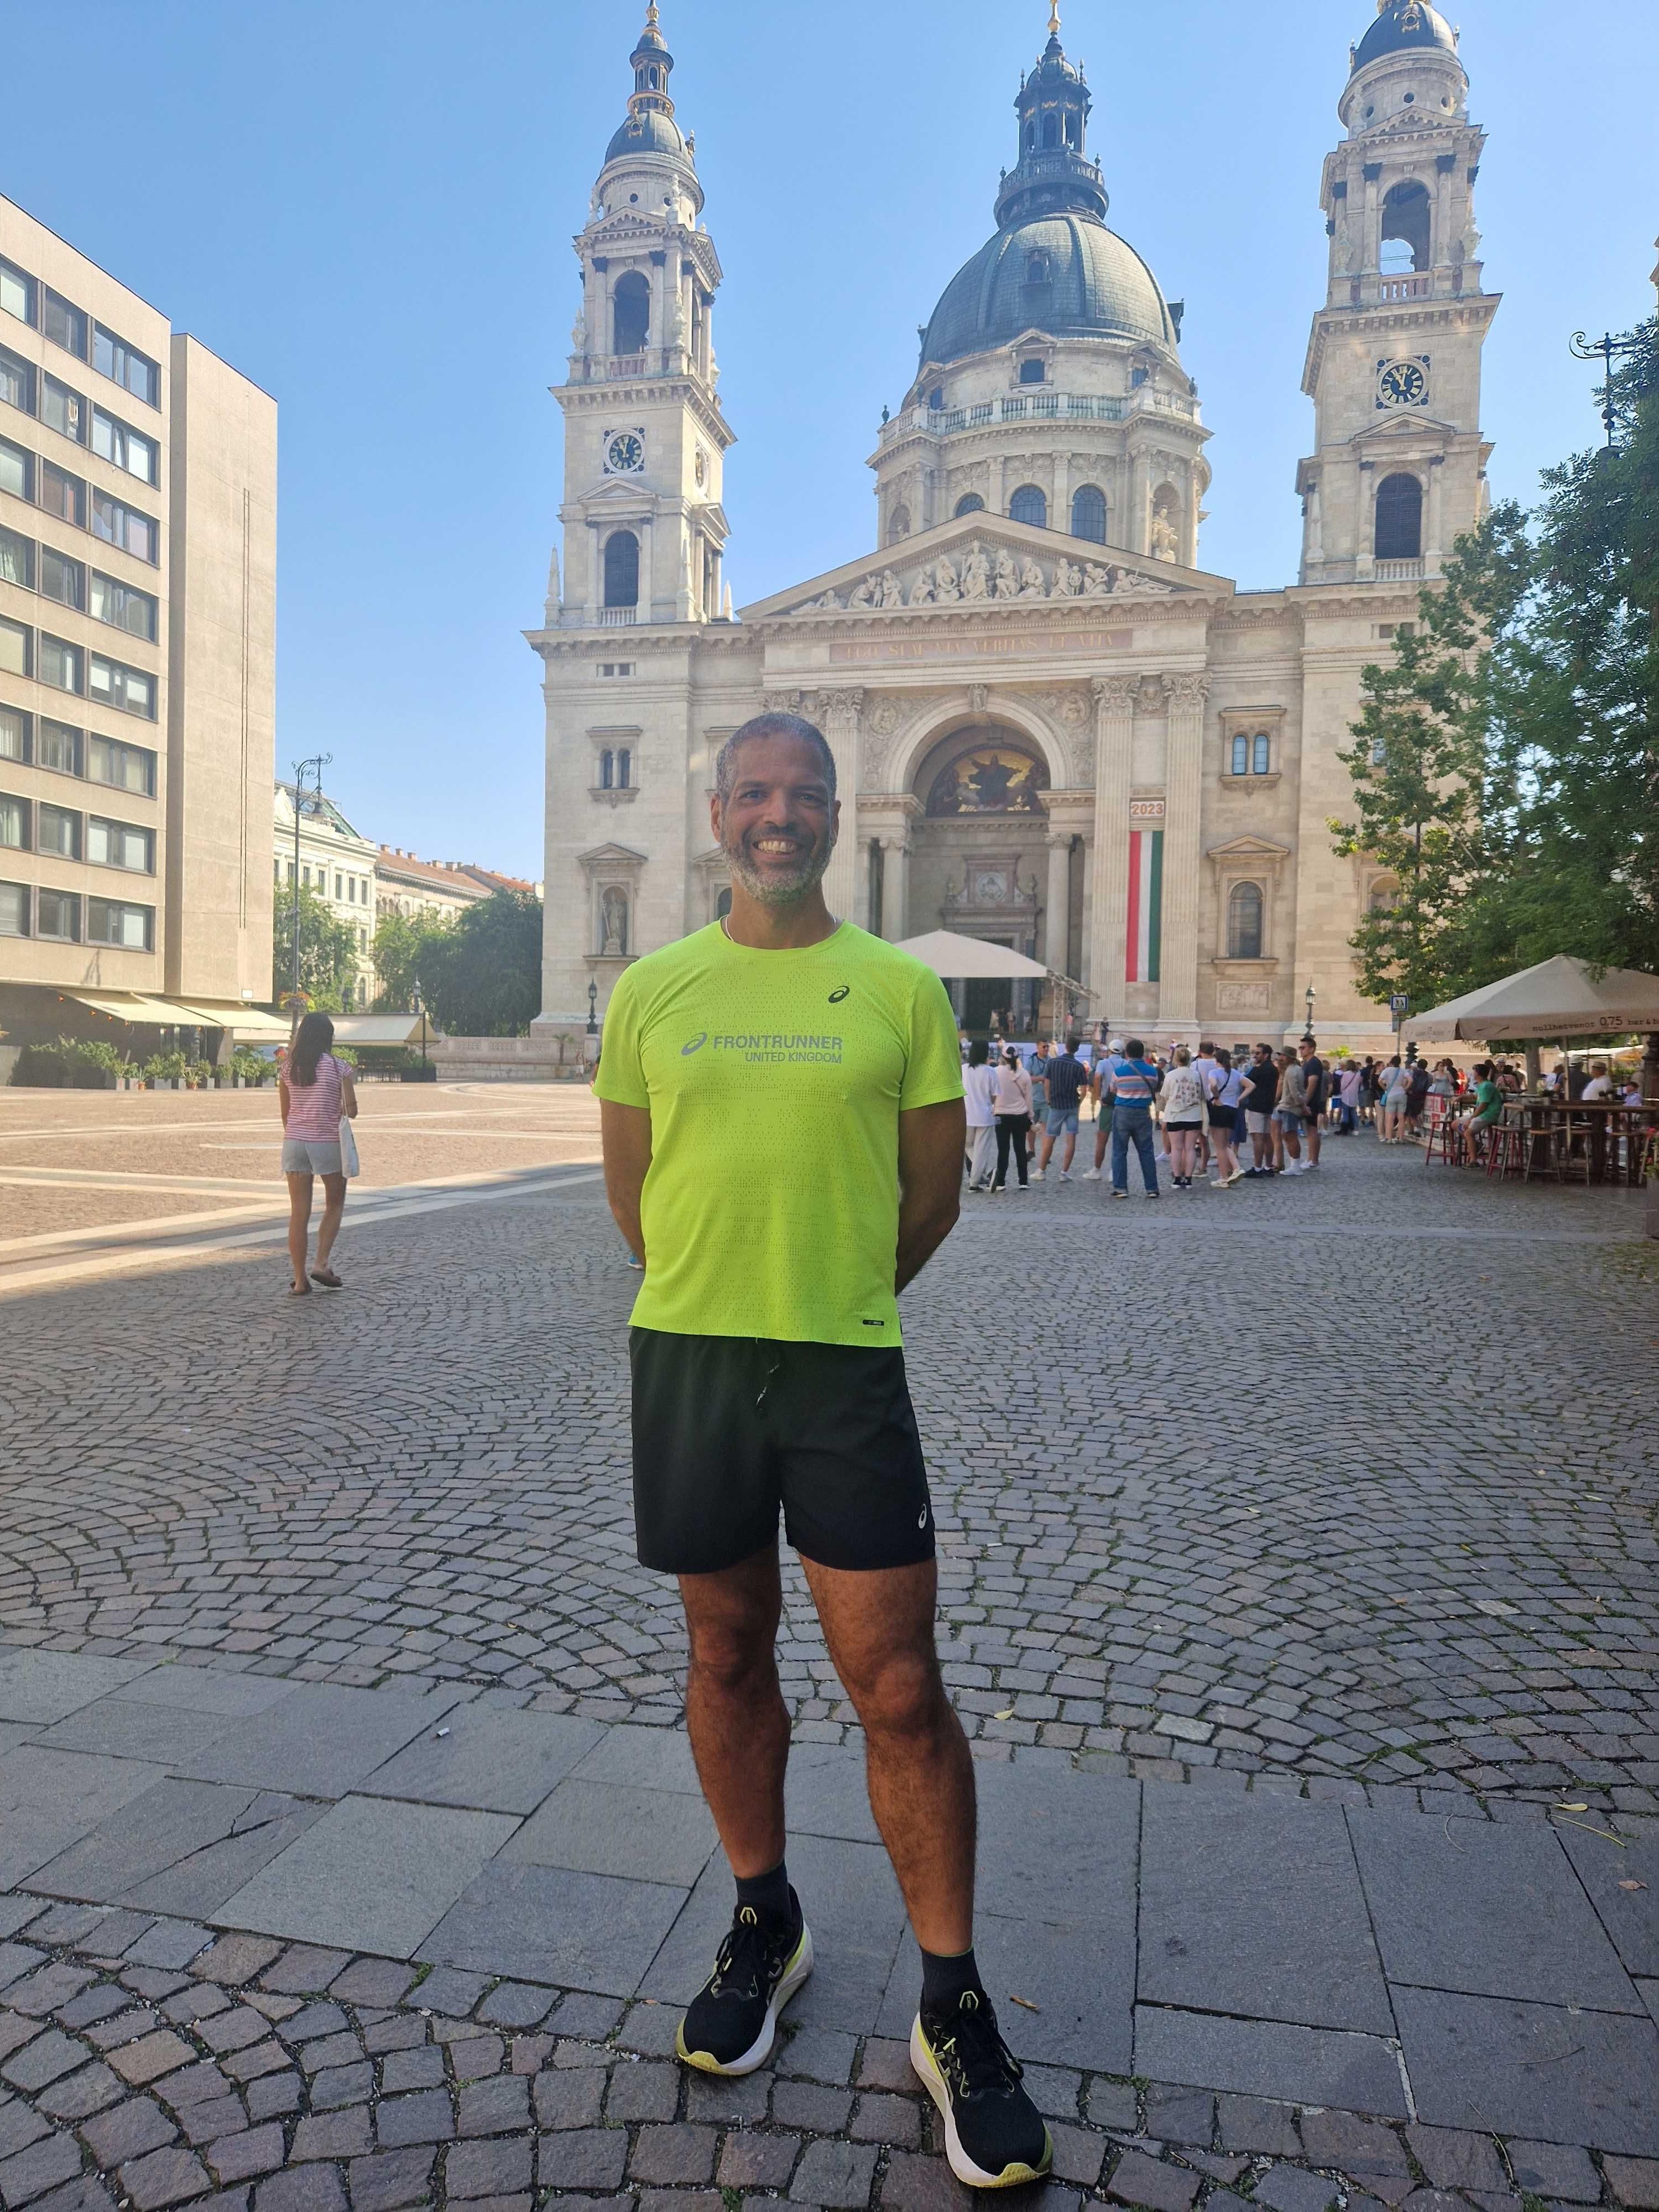 Sonny Peart in running kit, stood in front of a St Stephen's Basilica in Budapest.